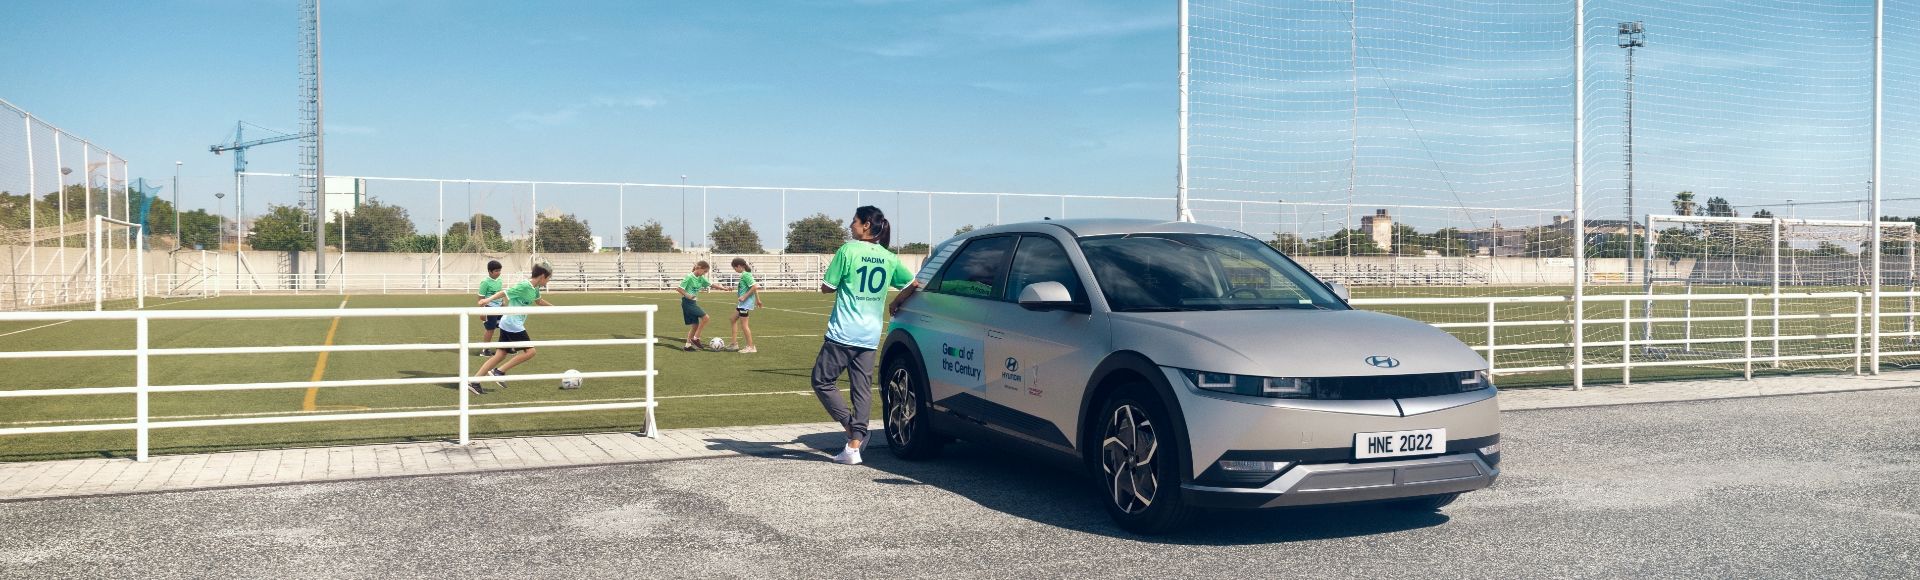 Footballer Nadia Nadim wearing her green and blue Team Century jersey while looking at the children on the football field leaning against IONIQ 5 during her visit of the Fútbol Más Foundation in Seville, Spain. 